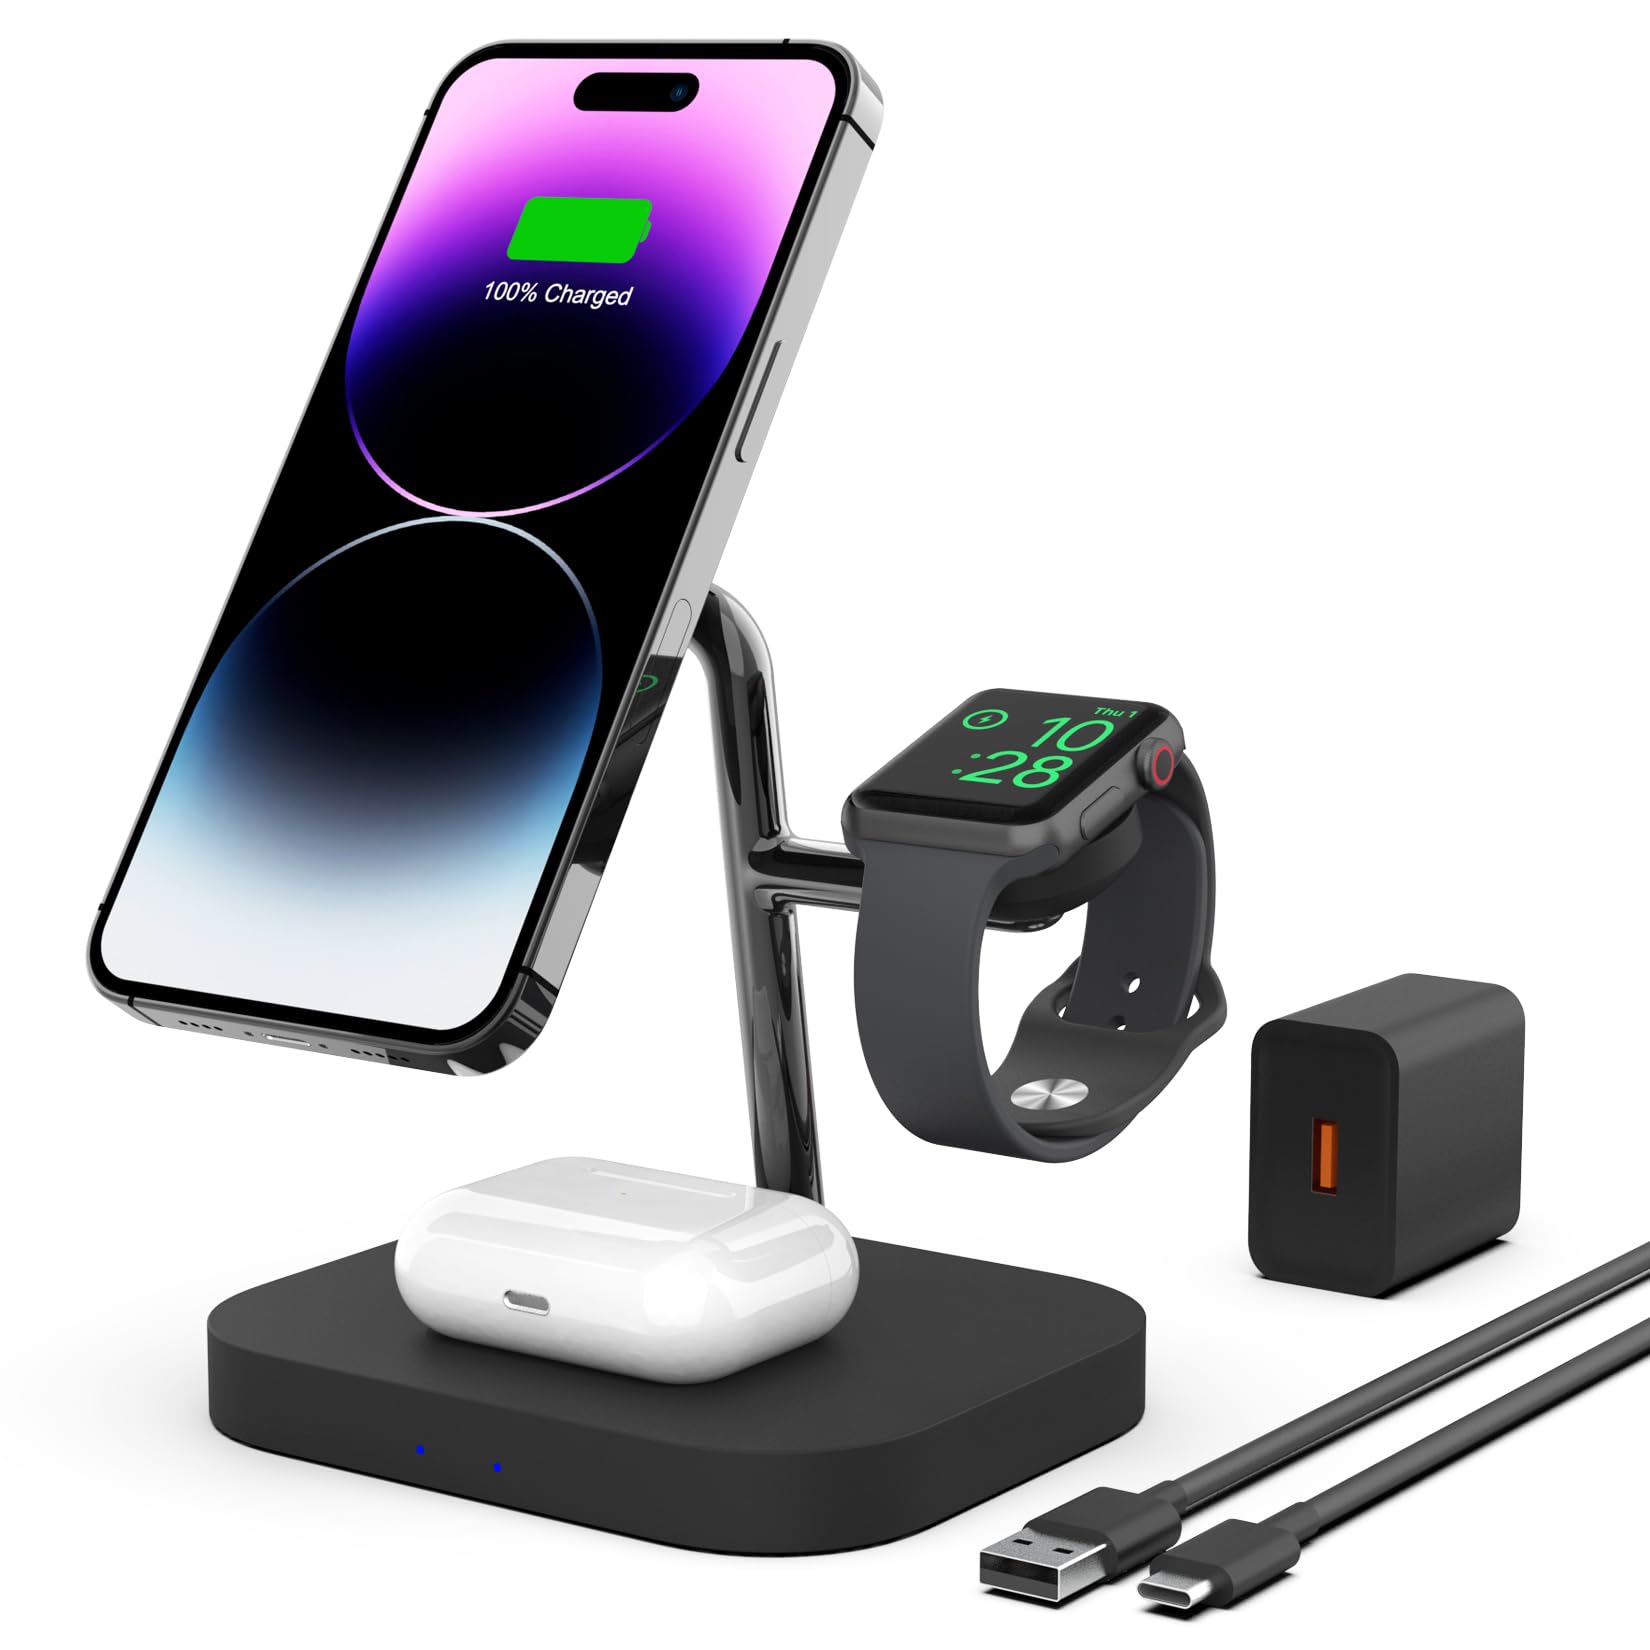 Addressing Heat Issues: IPhone Heating During Wireless Charging